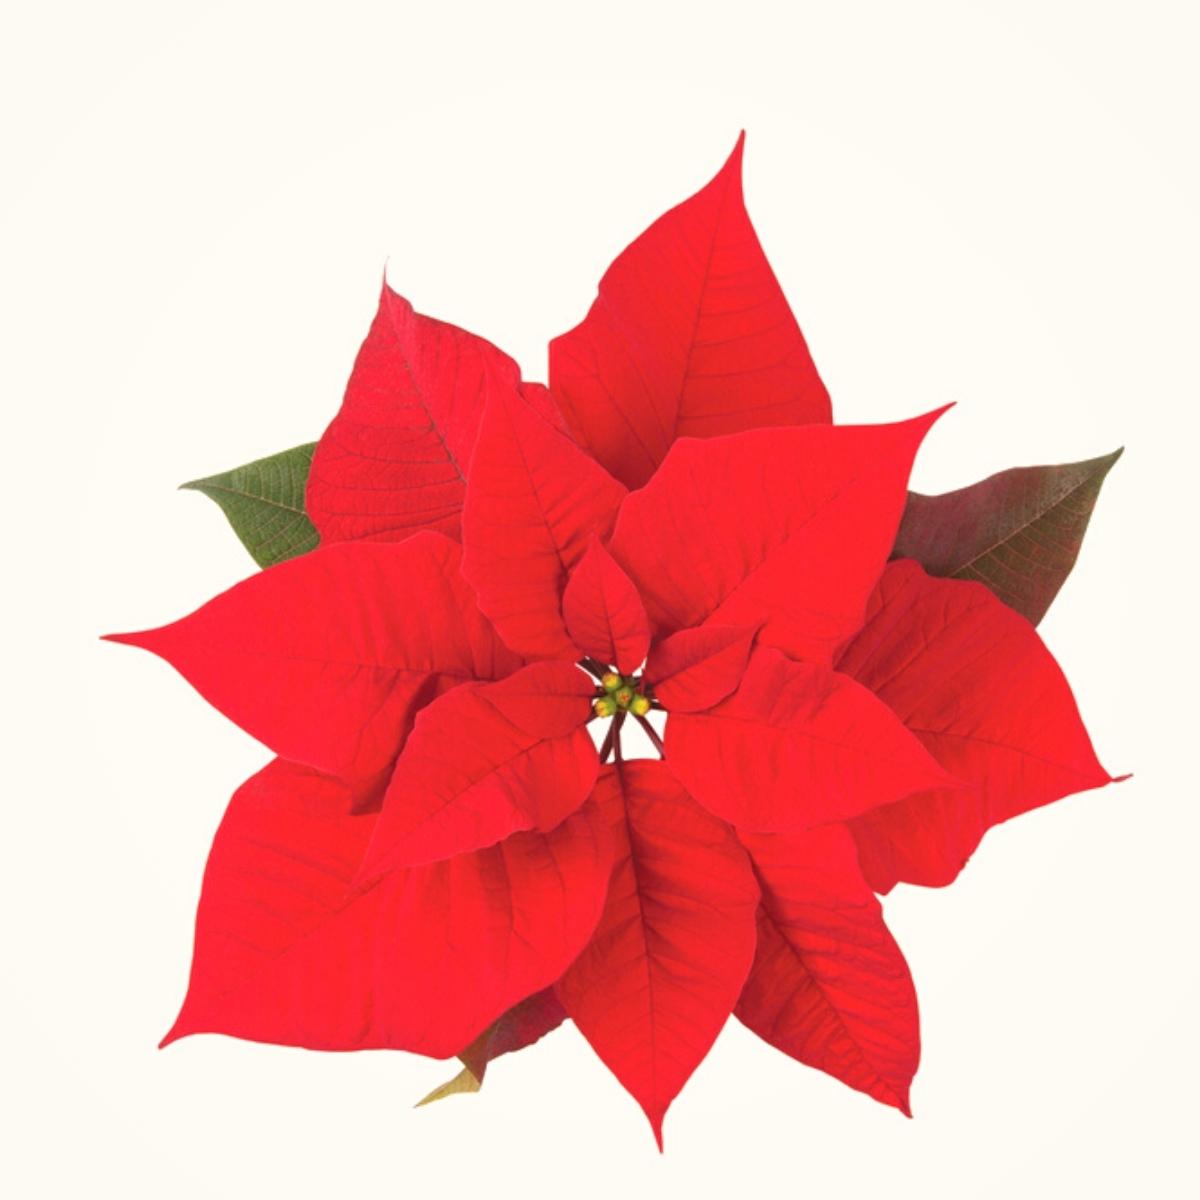 Florensis Passione Red poinsettia on Thursd